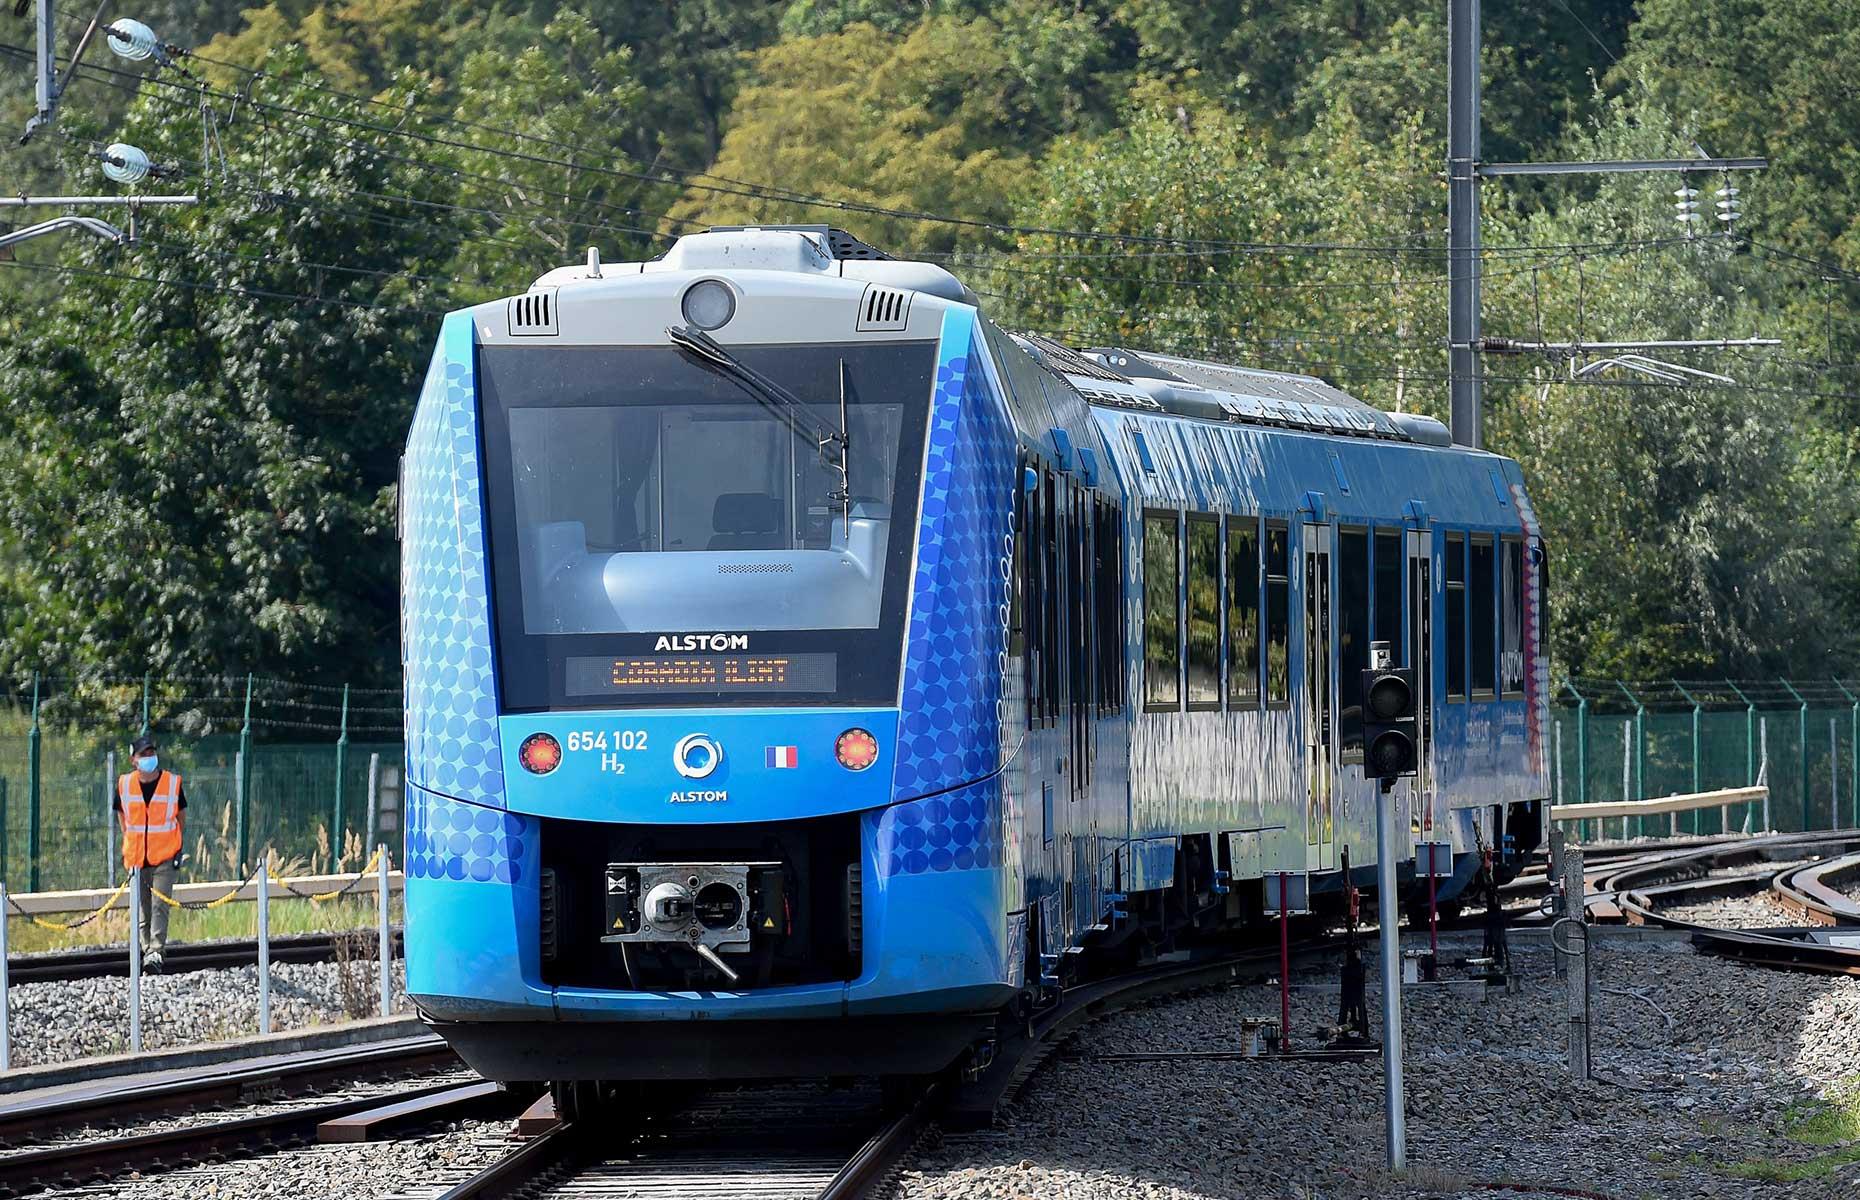 <p>Germany is now home to the world's first hydrogen-powered passenger trains – with plans to expand into Frankfurt, northern Italy and France. This emission-free mobility means that 14 trains will operate in Lower Saxony and are expected to completely replace diesel trains by the end of 2022. Pictured here is one of the Coradia iLint trains on a trial run in France in September 2021.</p>